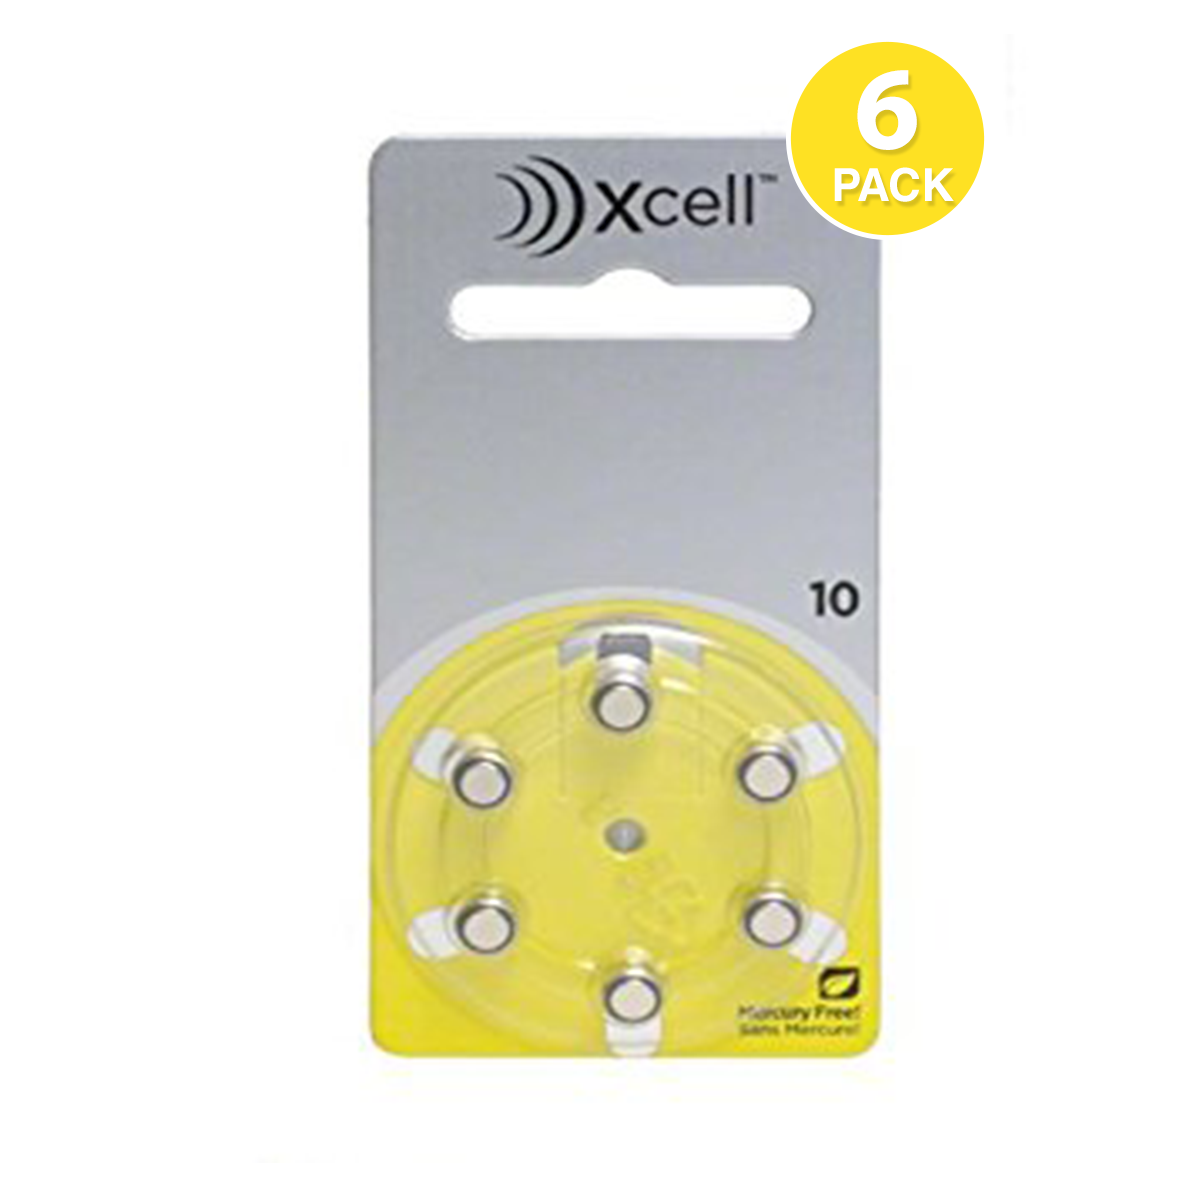 Xcell (Made by Rayovac) Hearing Aid Battery, Size 10, Mercury Free (6 Pcs)